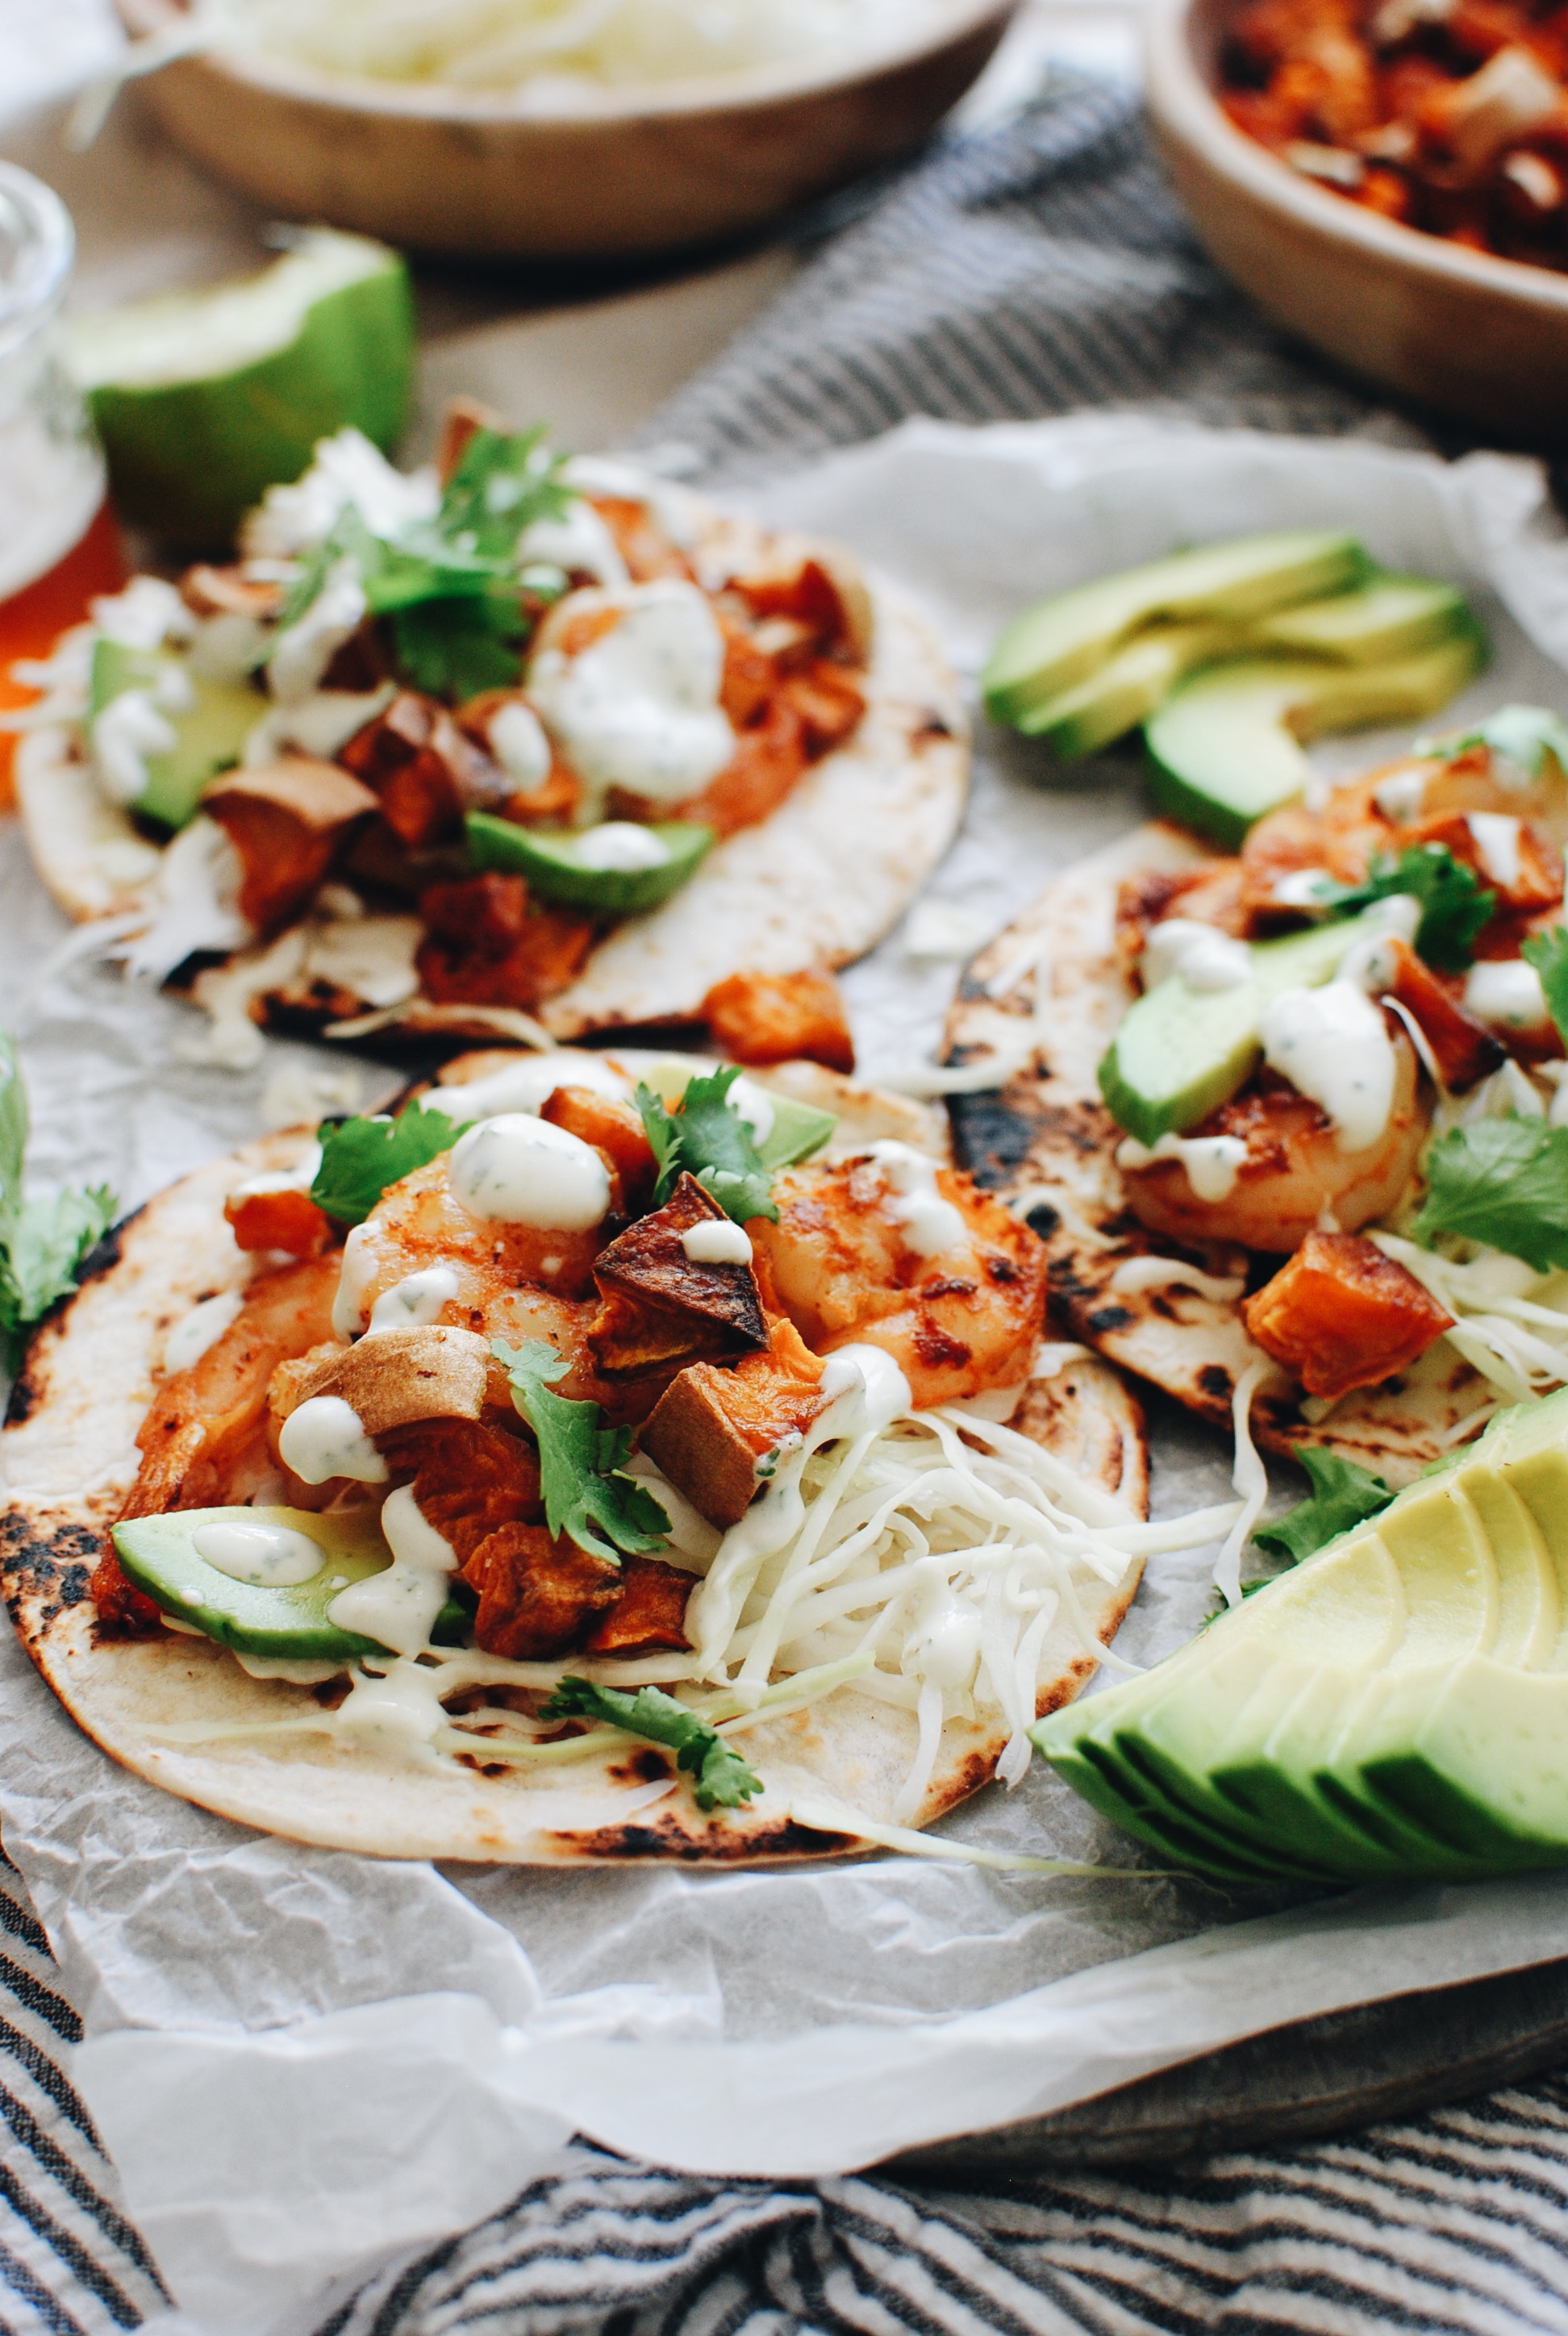 Shrimp and Cabbage Tacos with a Roasted Garlic Crema / Bev Cooks